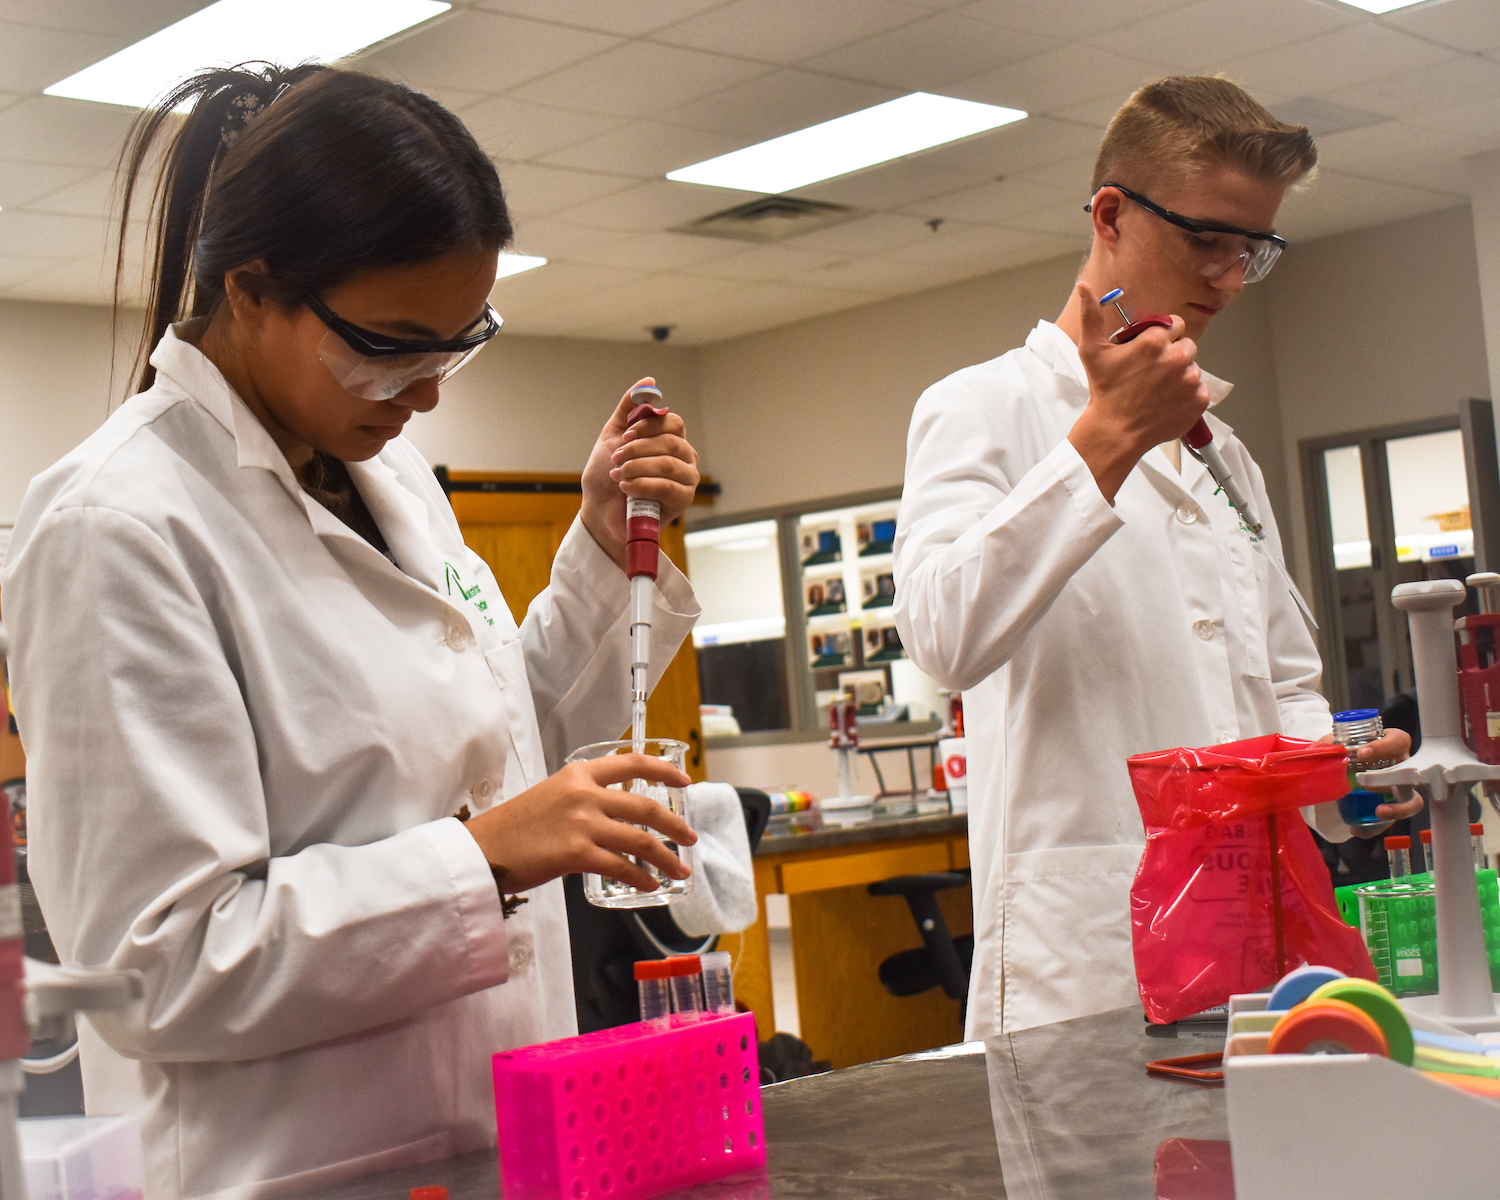 Students working in a lab environment